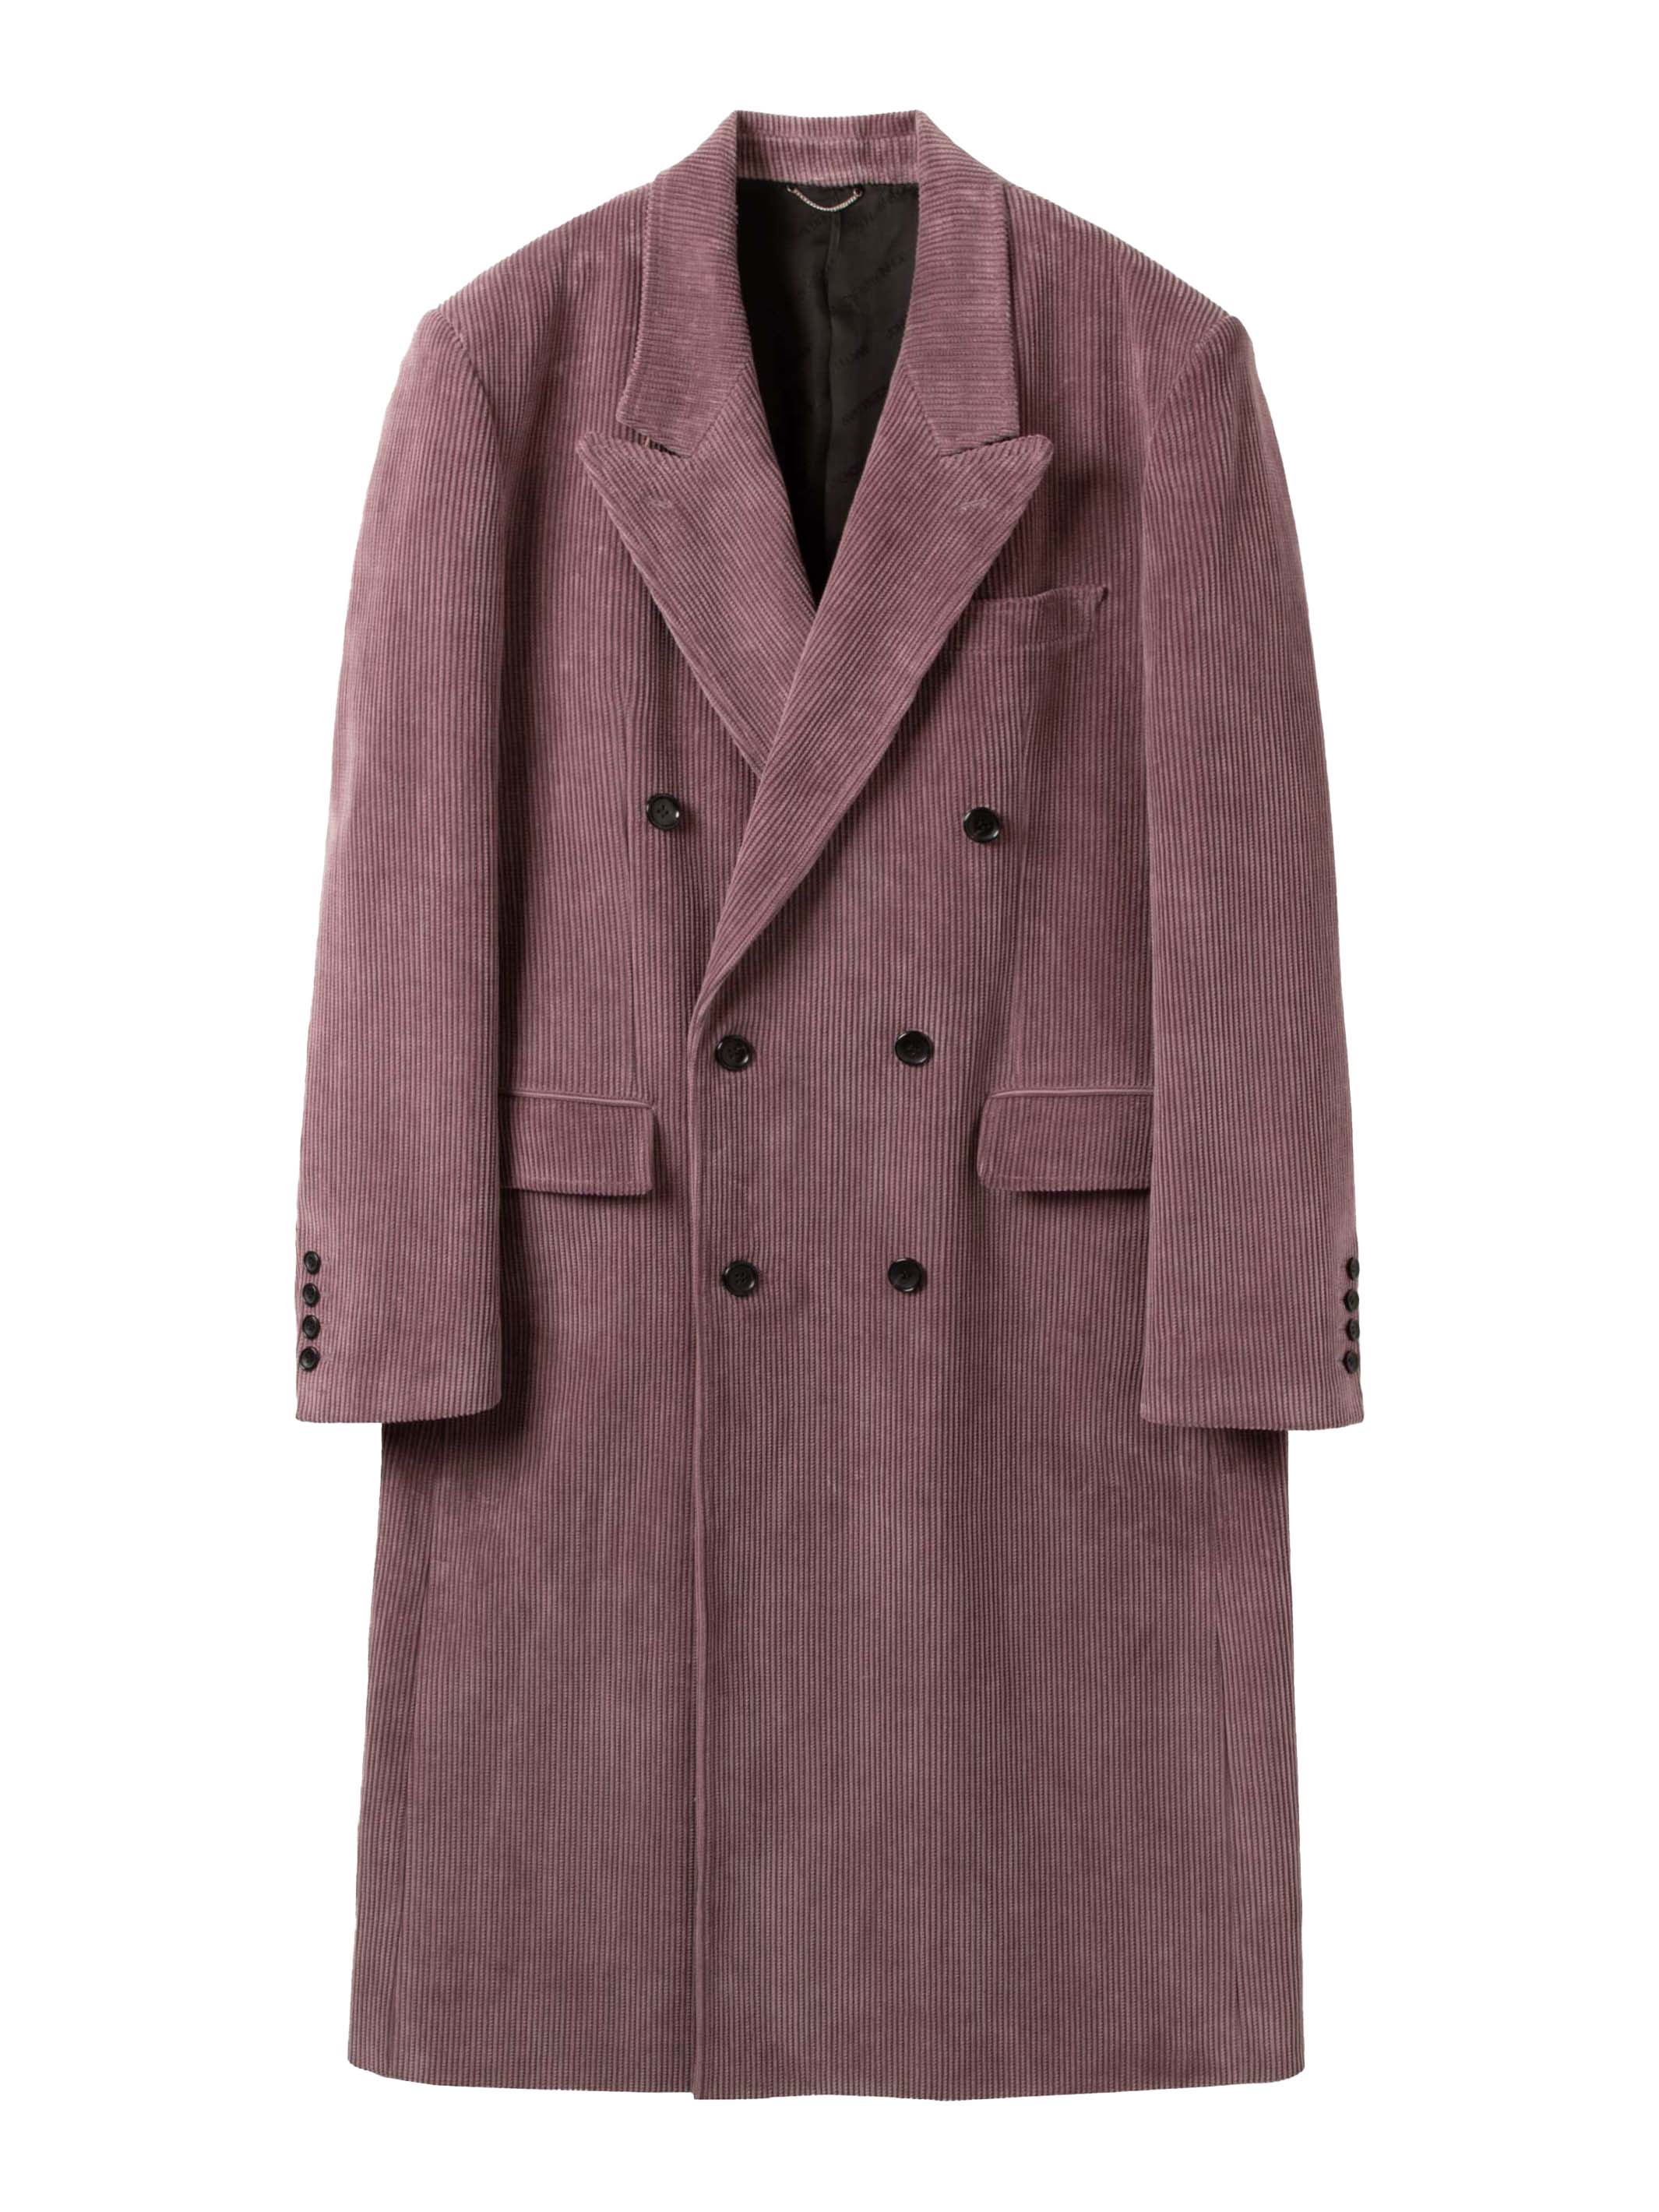 Cotton corduroy double breasted coat